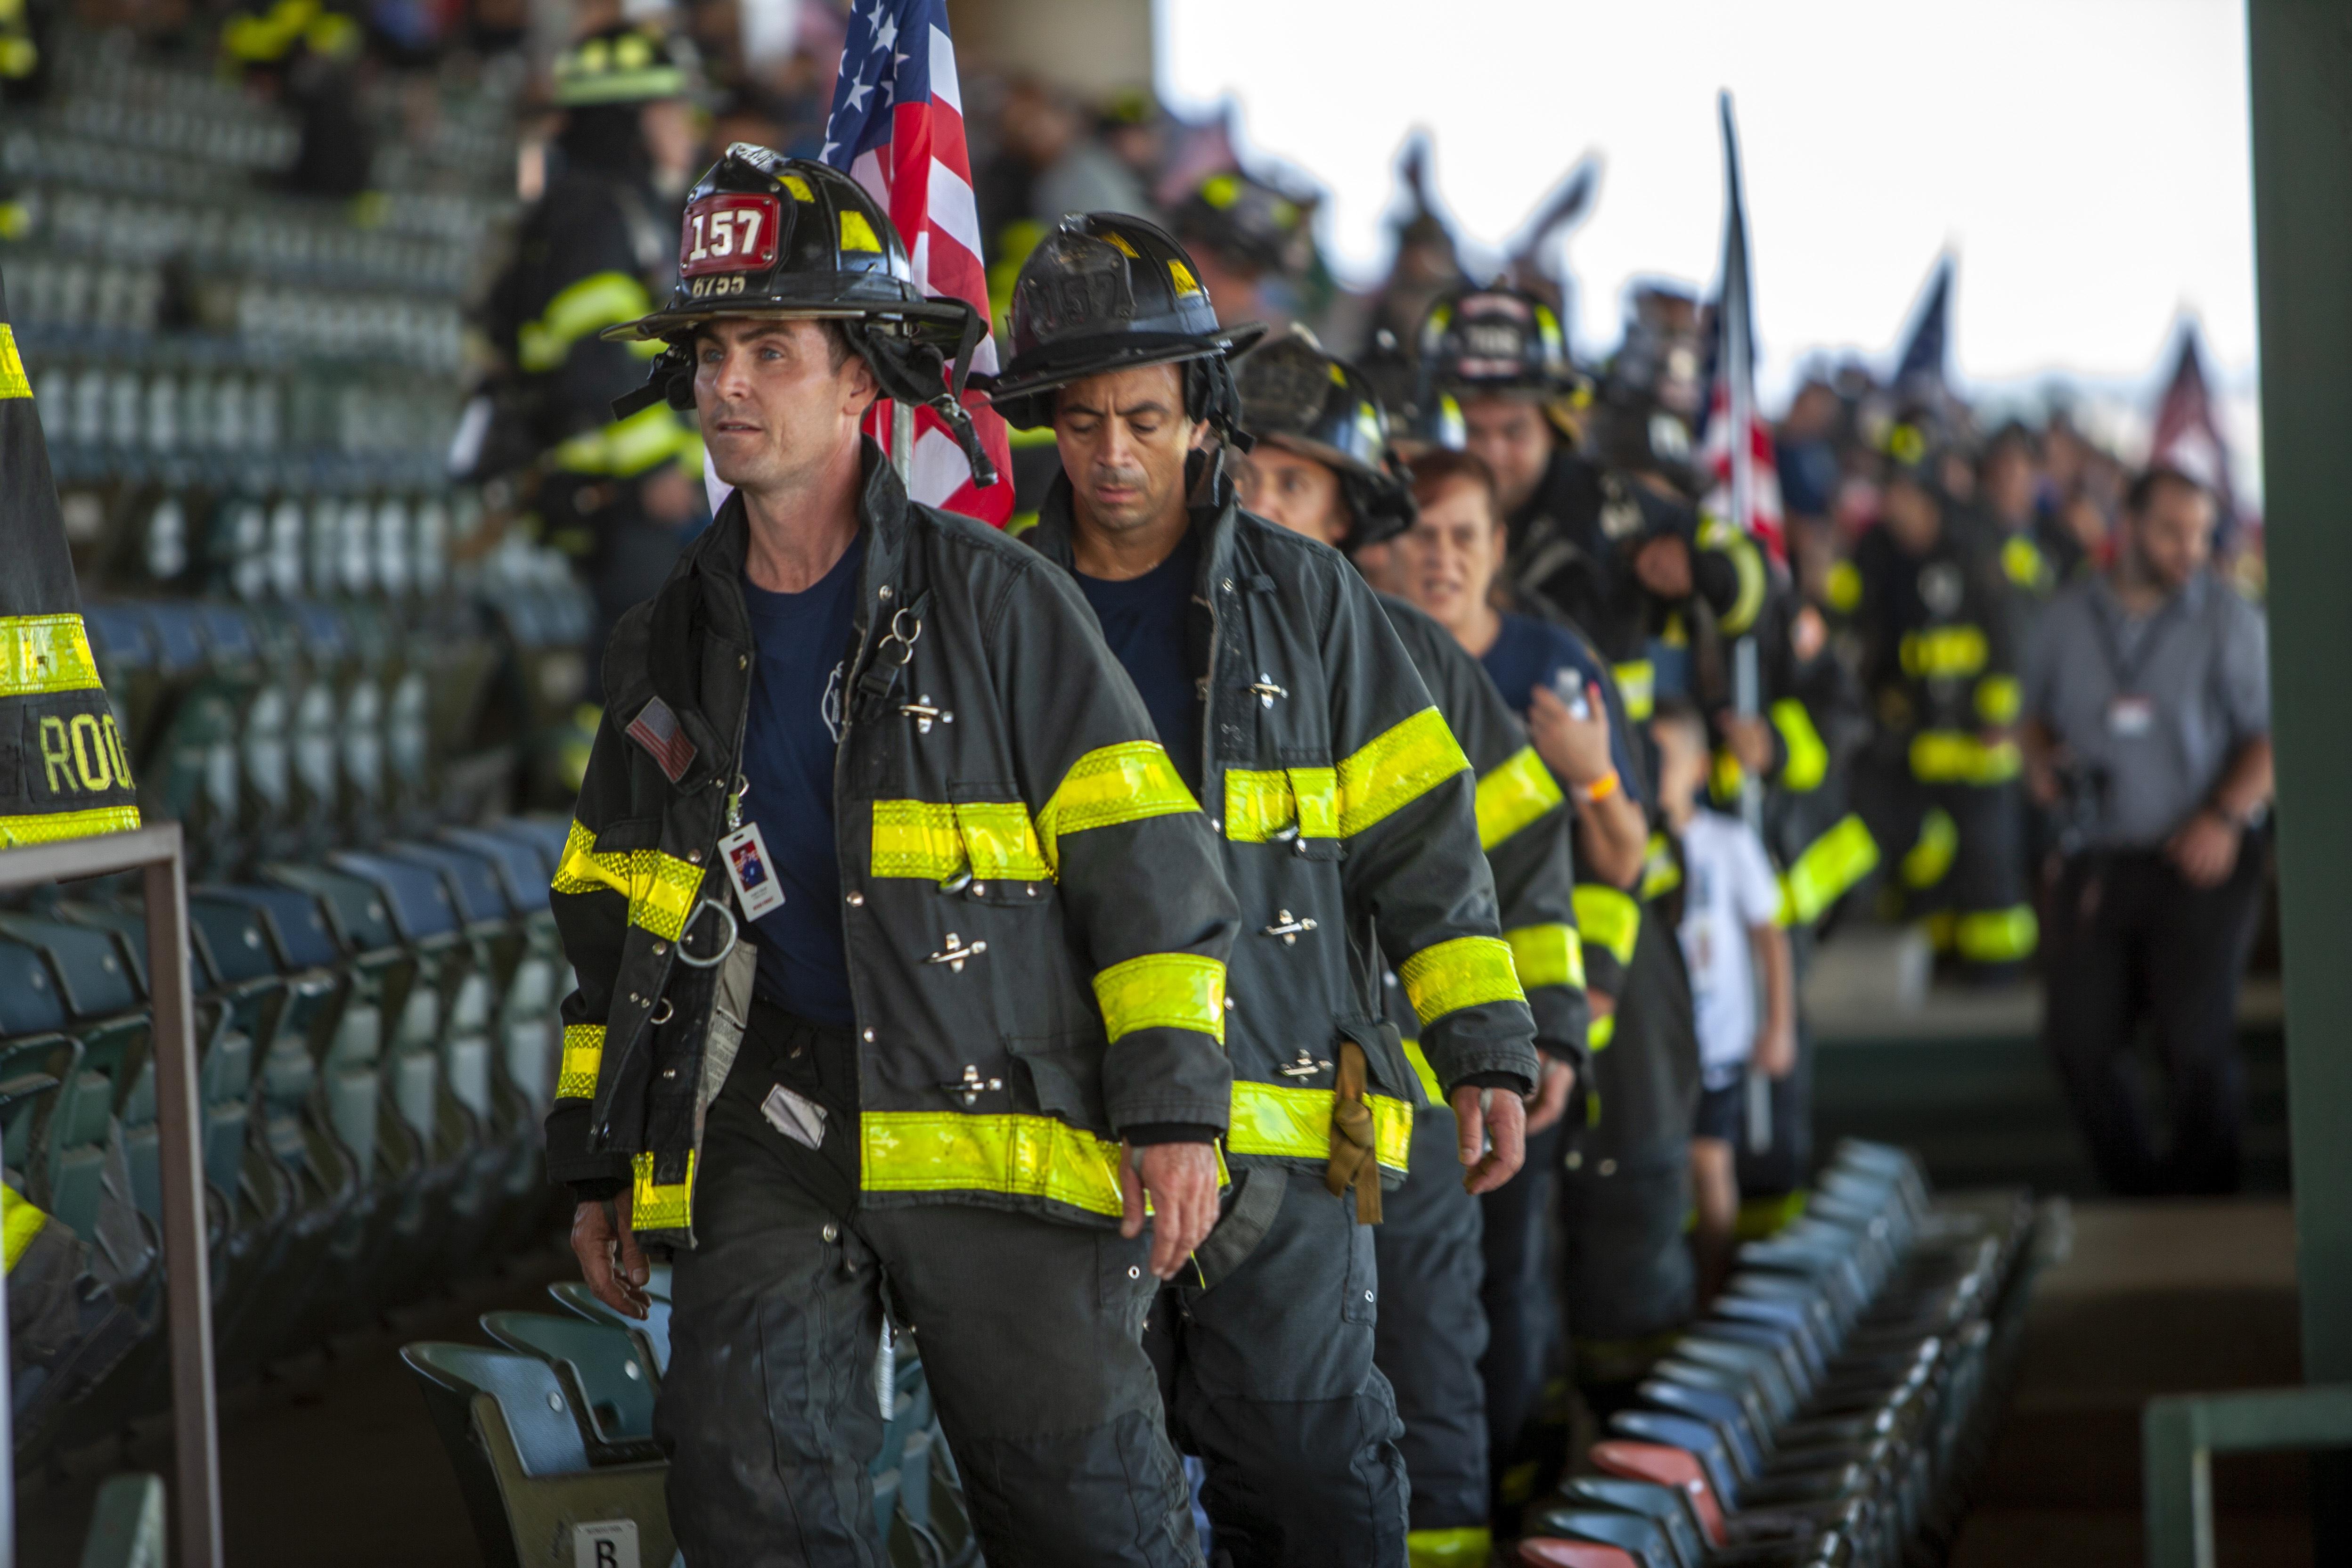 Join National Stair Climb to Honor Fallen Firefighters, Support Their Families